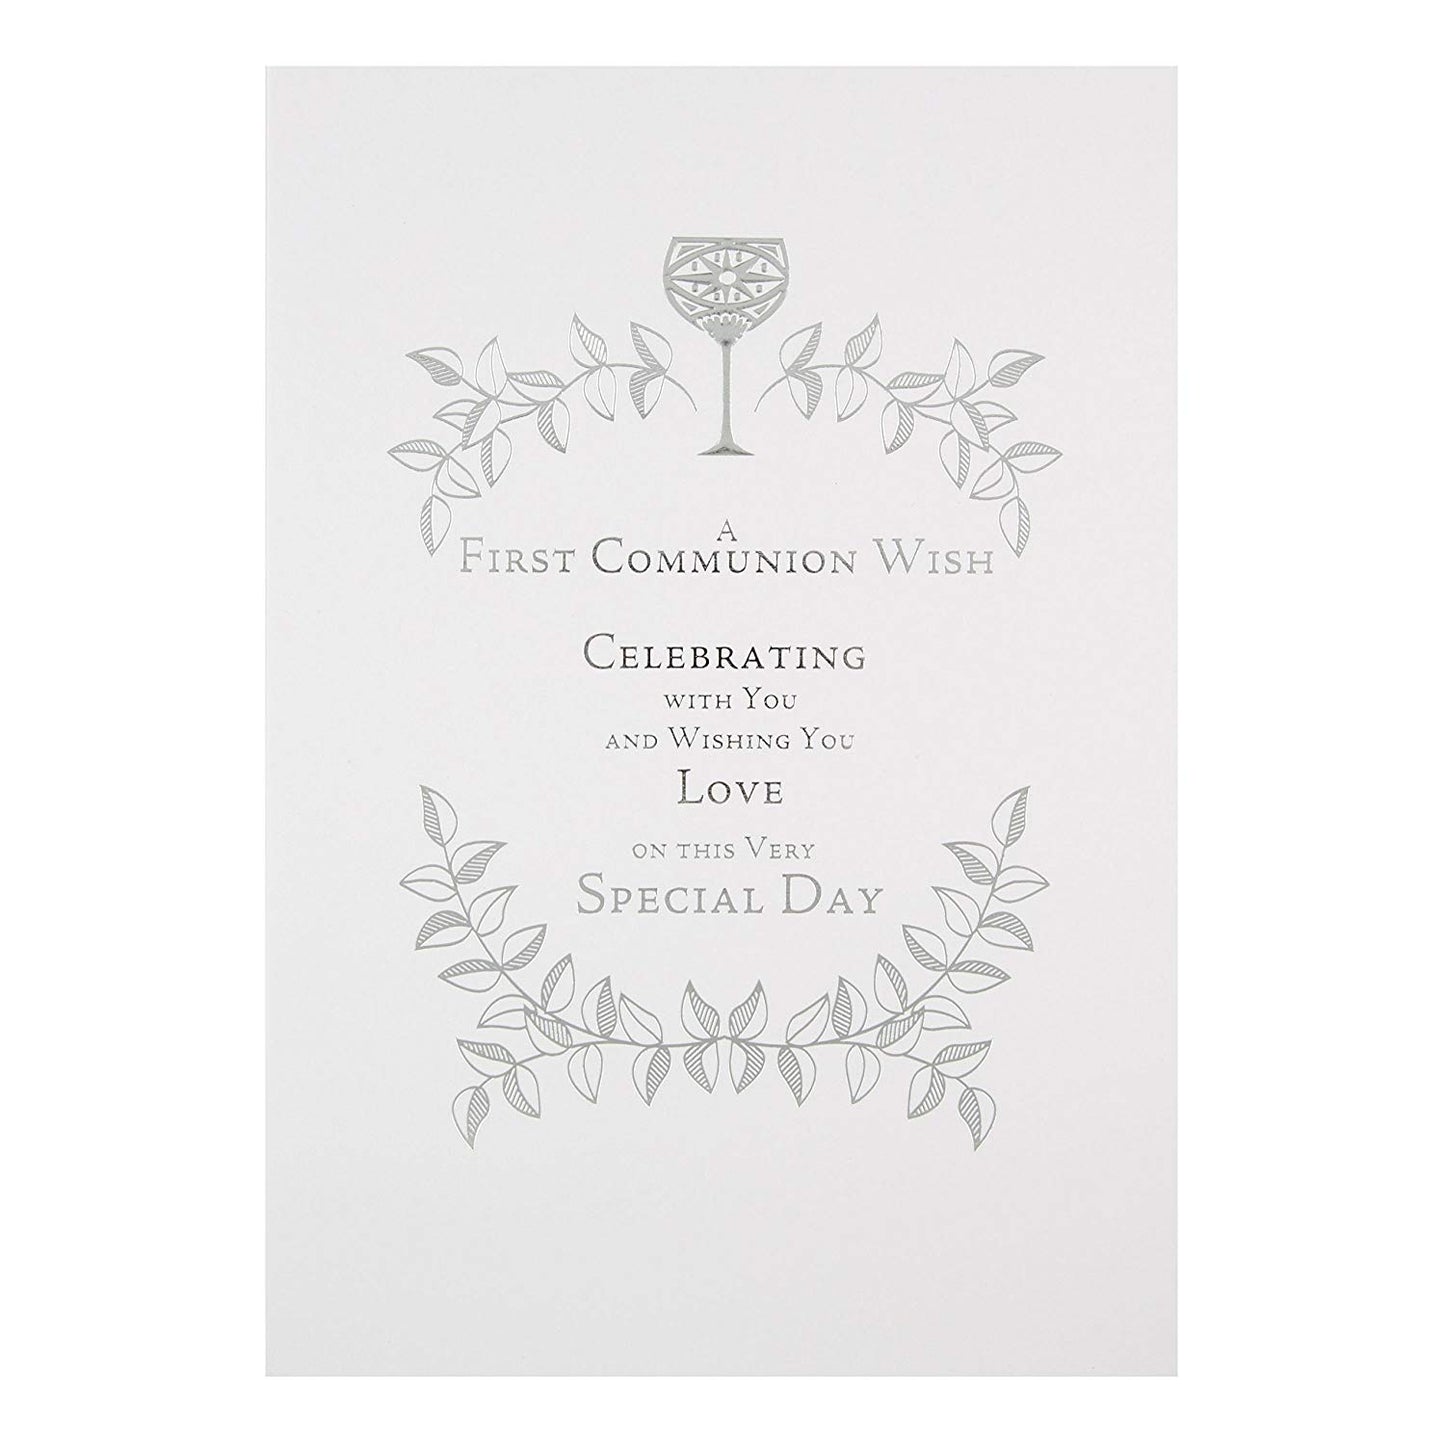 Communion Card "Special Day" for Her/ Him